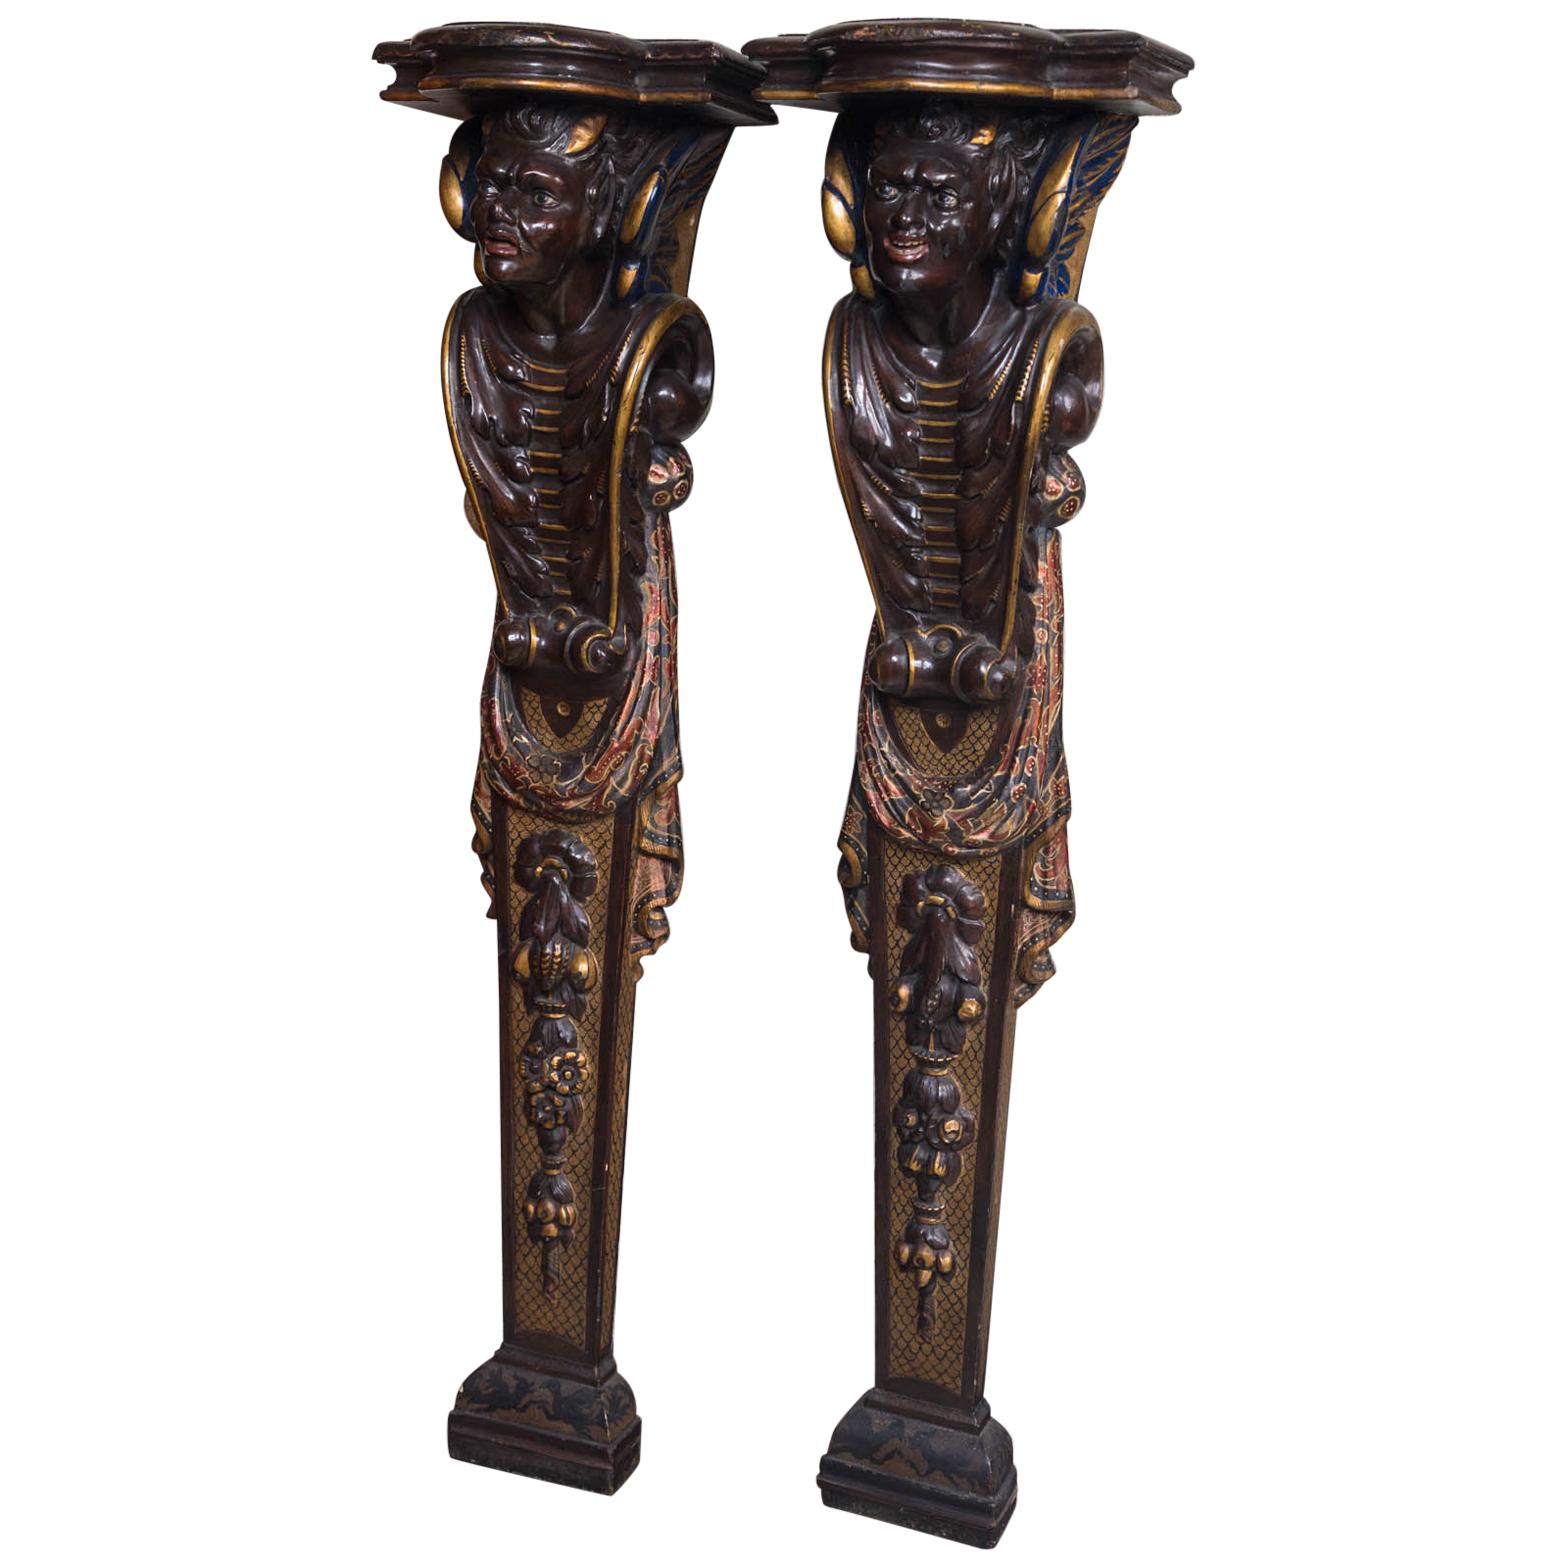 Pair of Carved and Painted Wood "Devilish" Pilasters For Sale